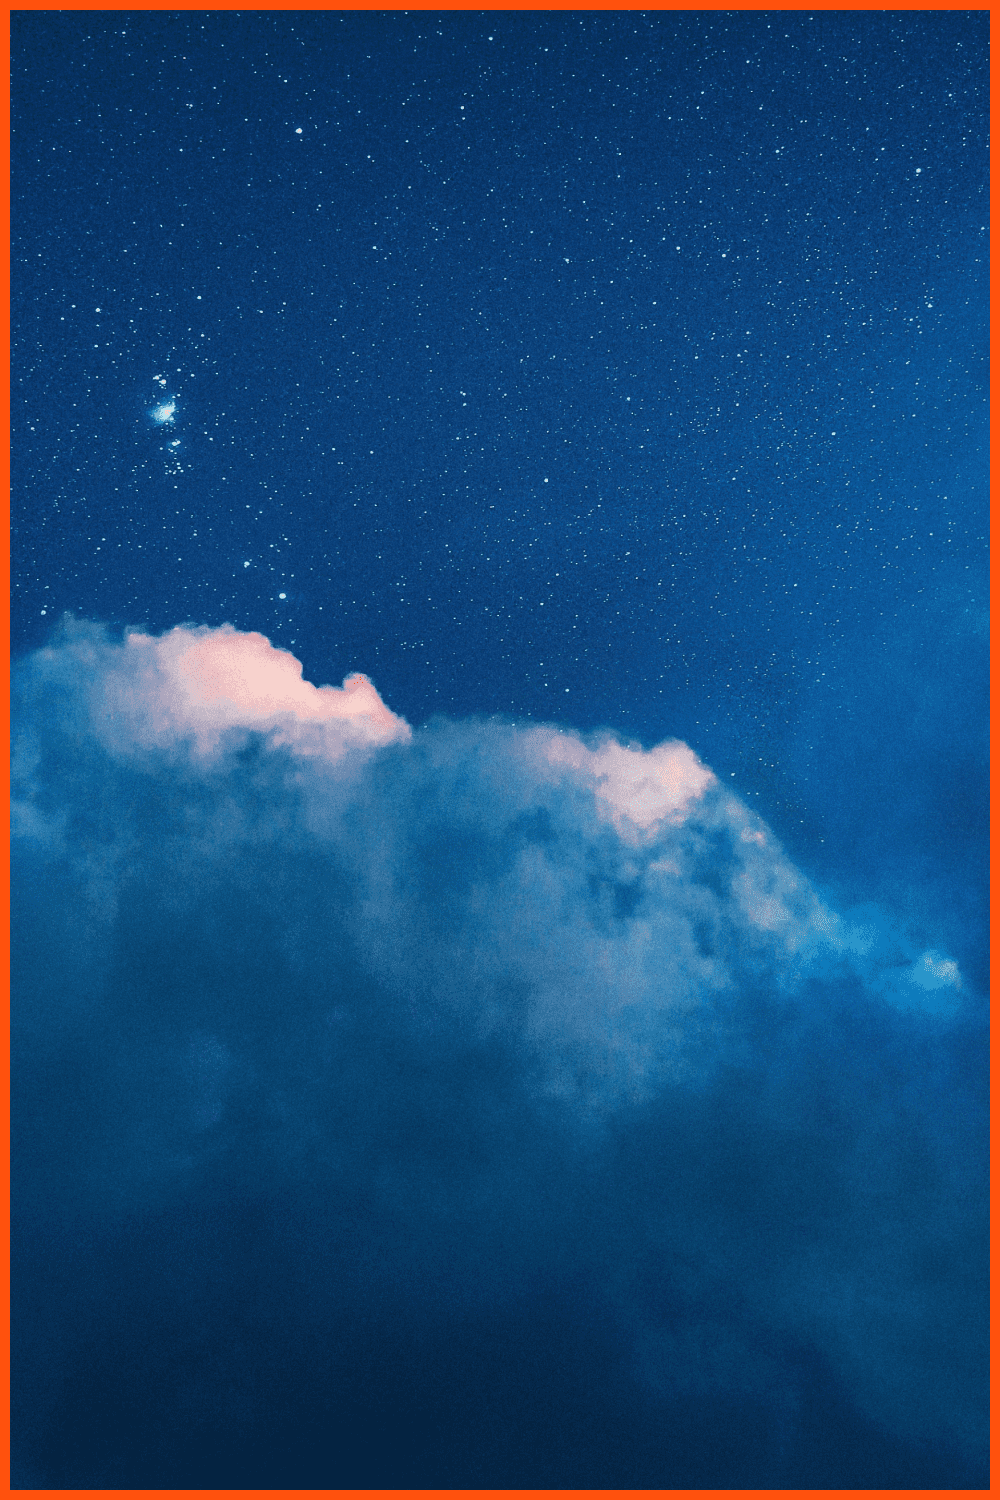 Photo of blue clouds against the starry sky.